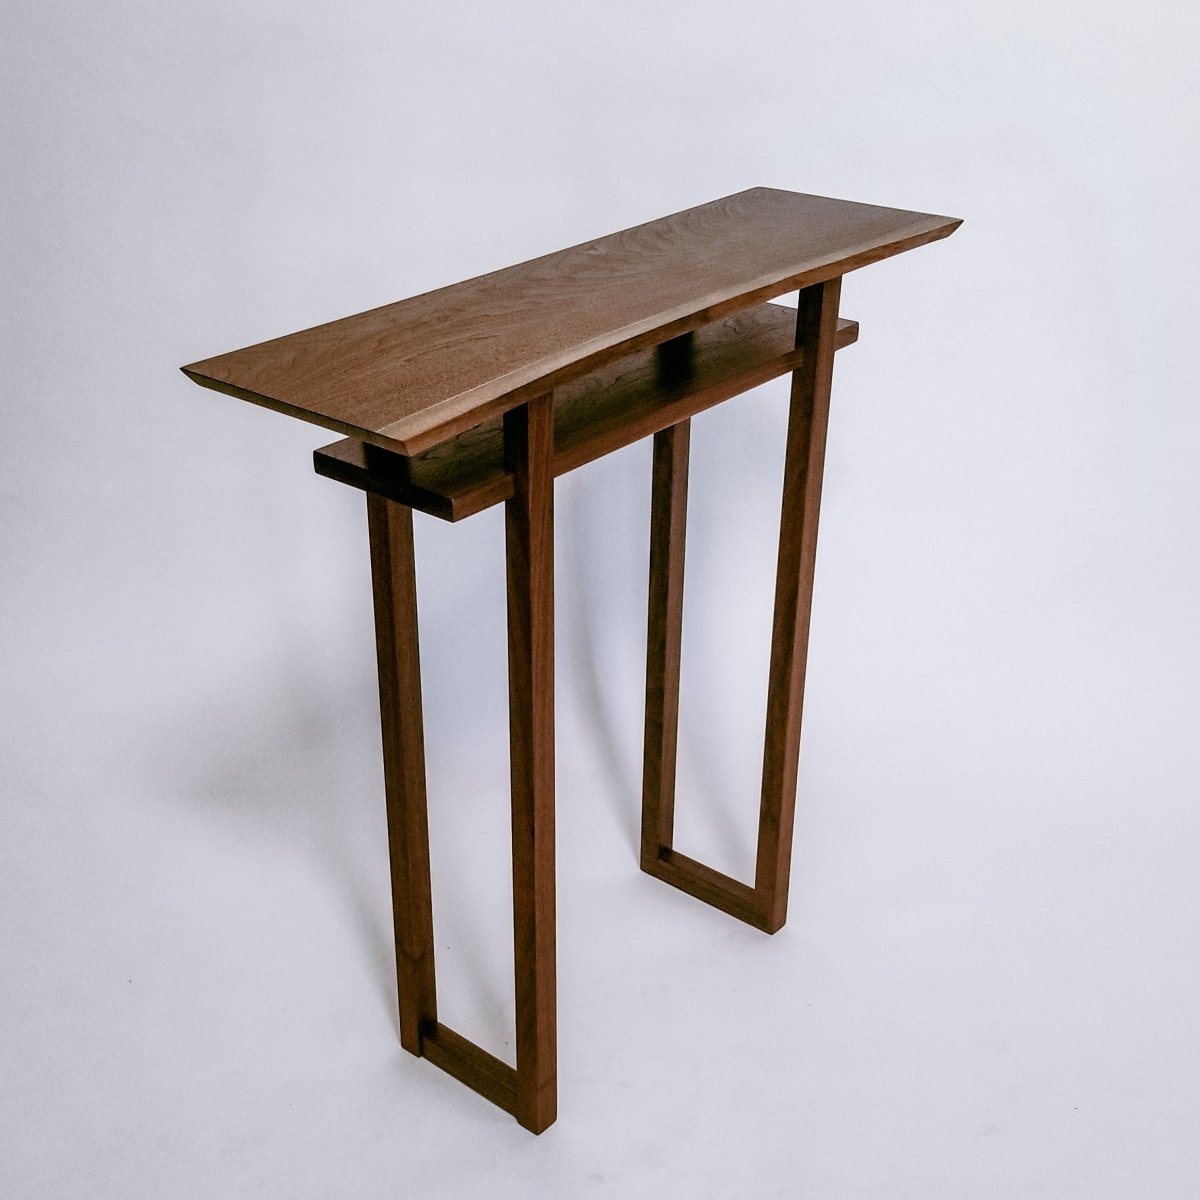 A narrow wooden table created from solid walnut with a live edge table top